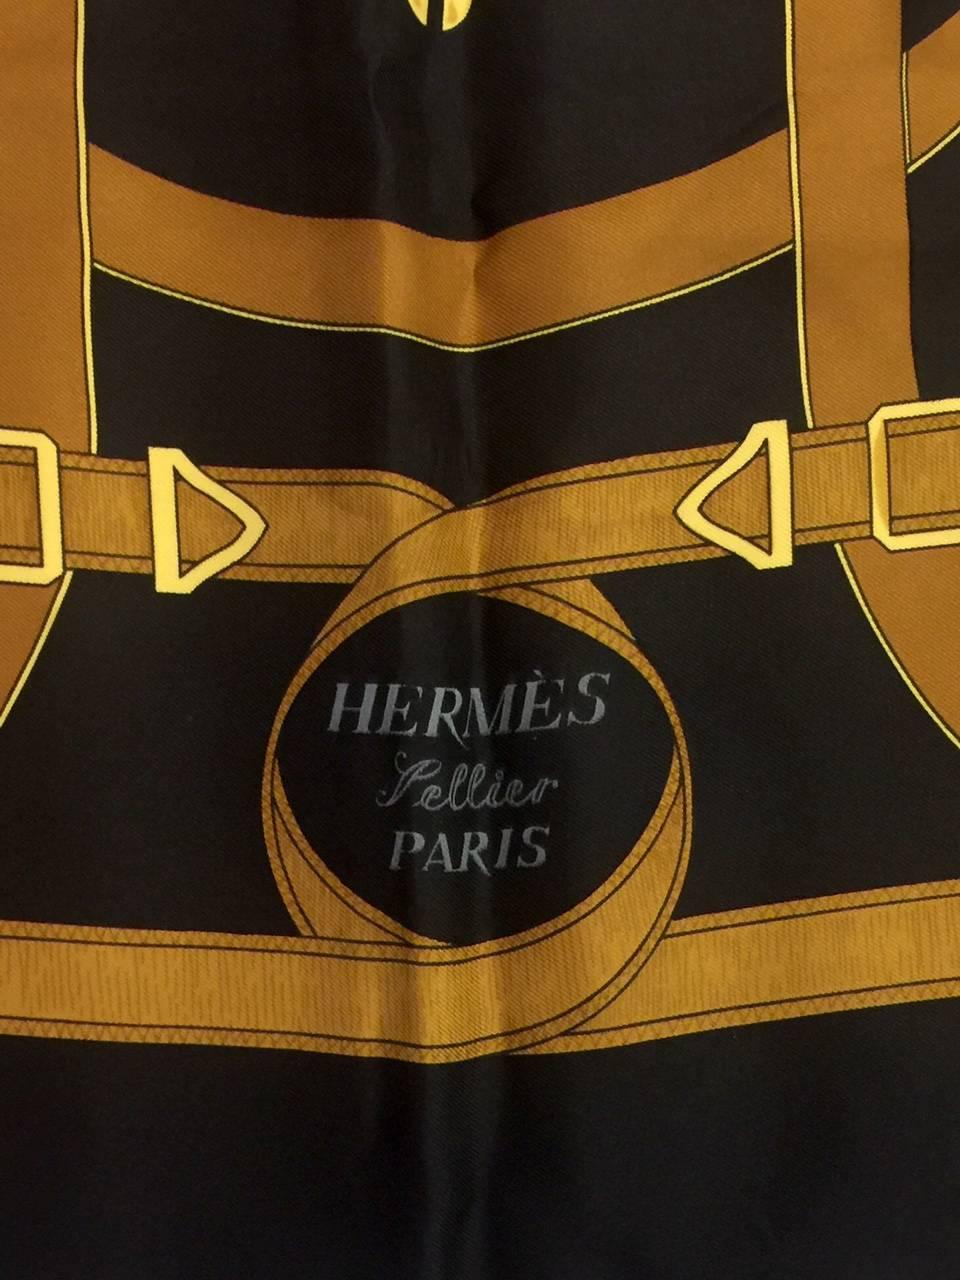 eperon d'or hermes